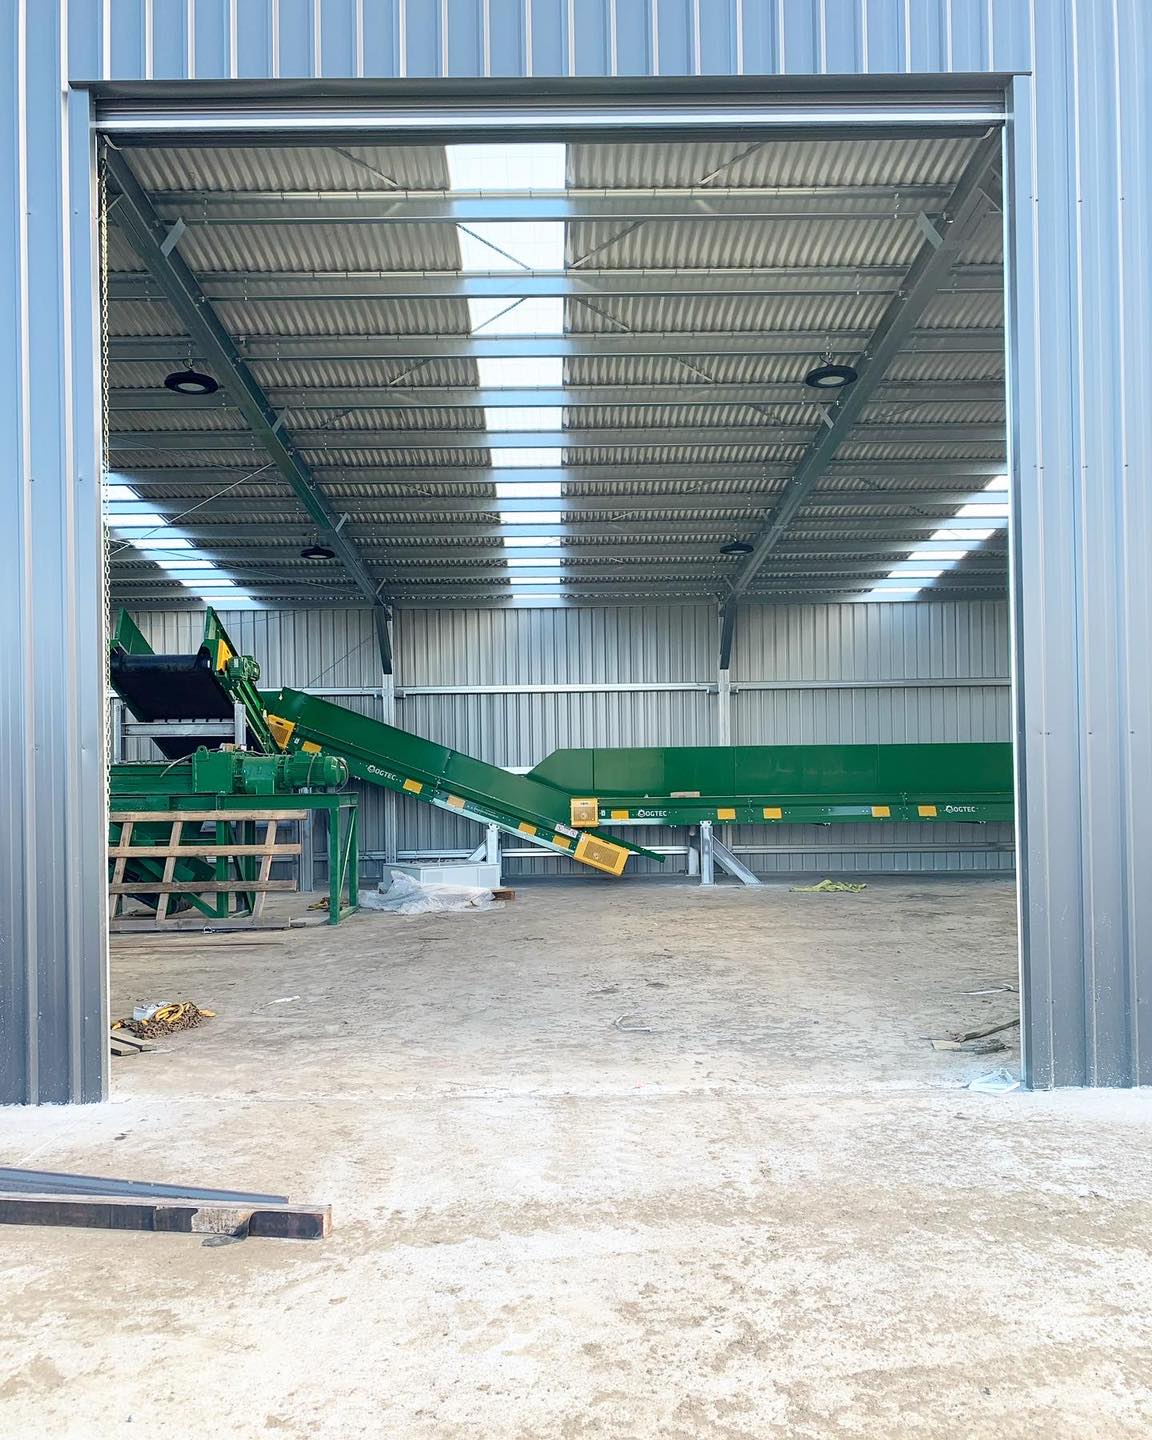 Photo of large shed looking through the door at new machinery with conveyor belts and chutes.